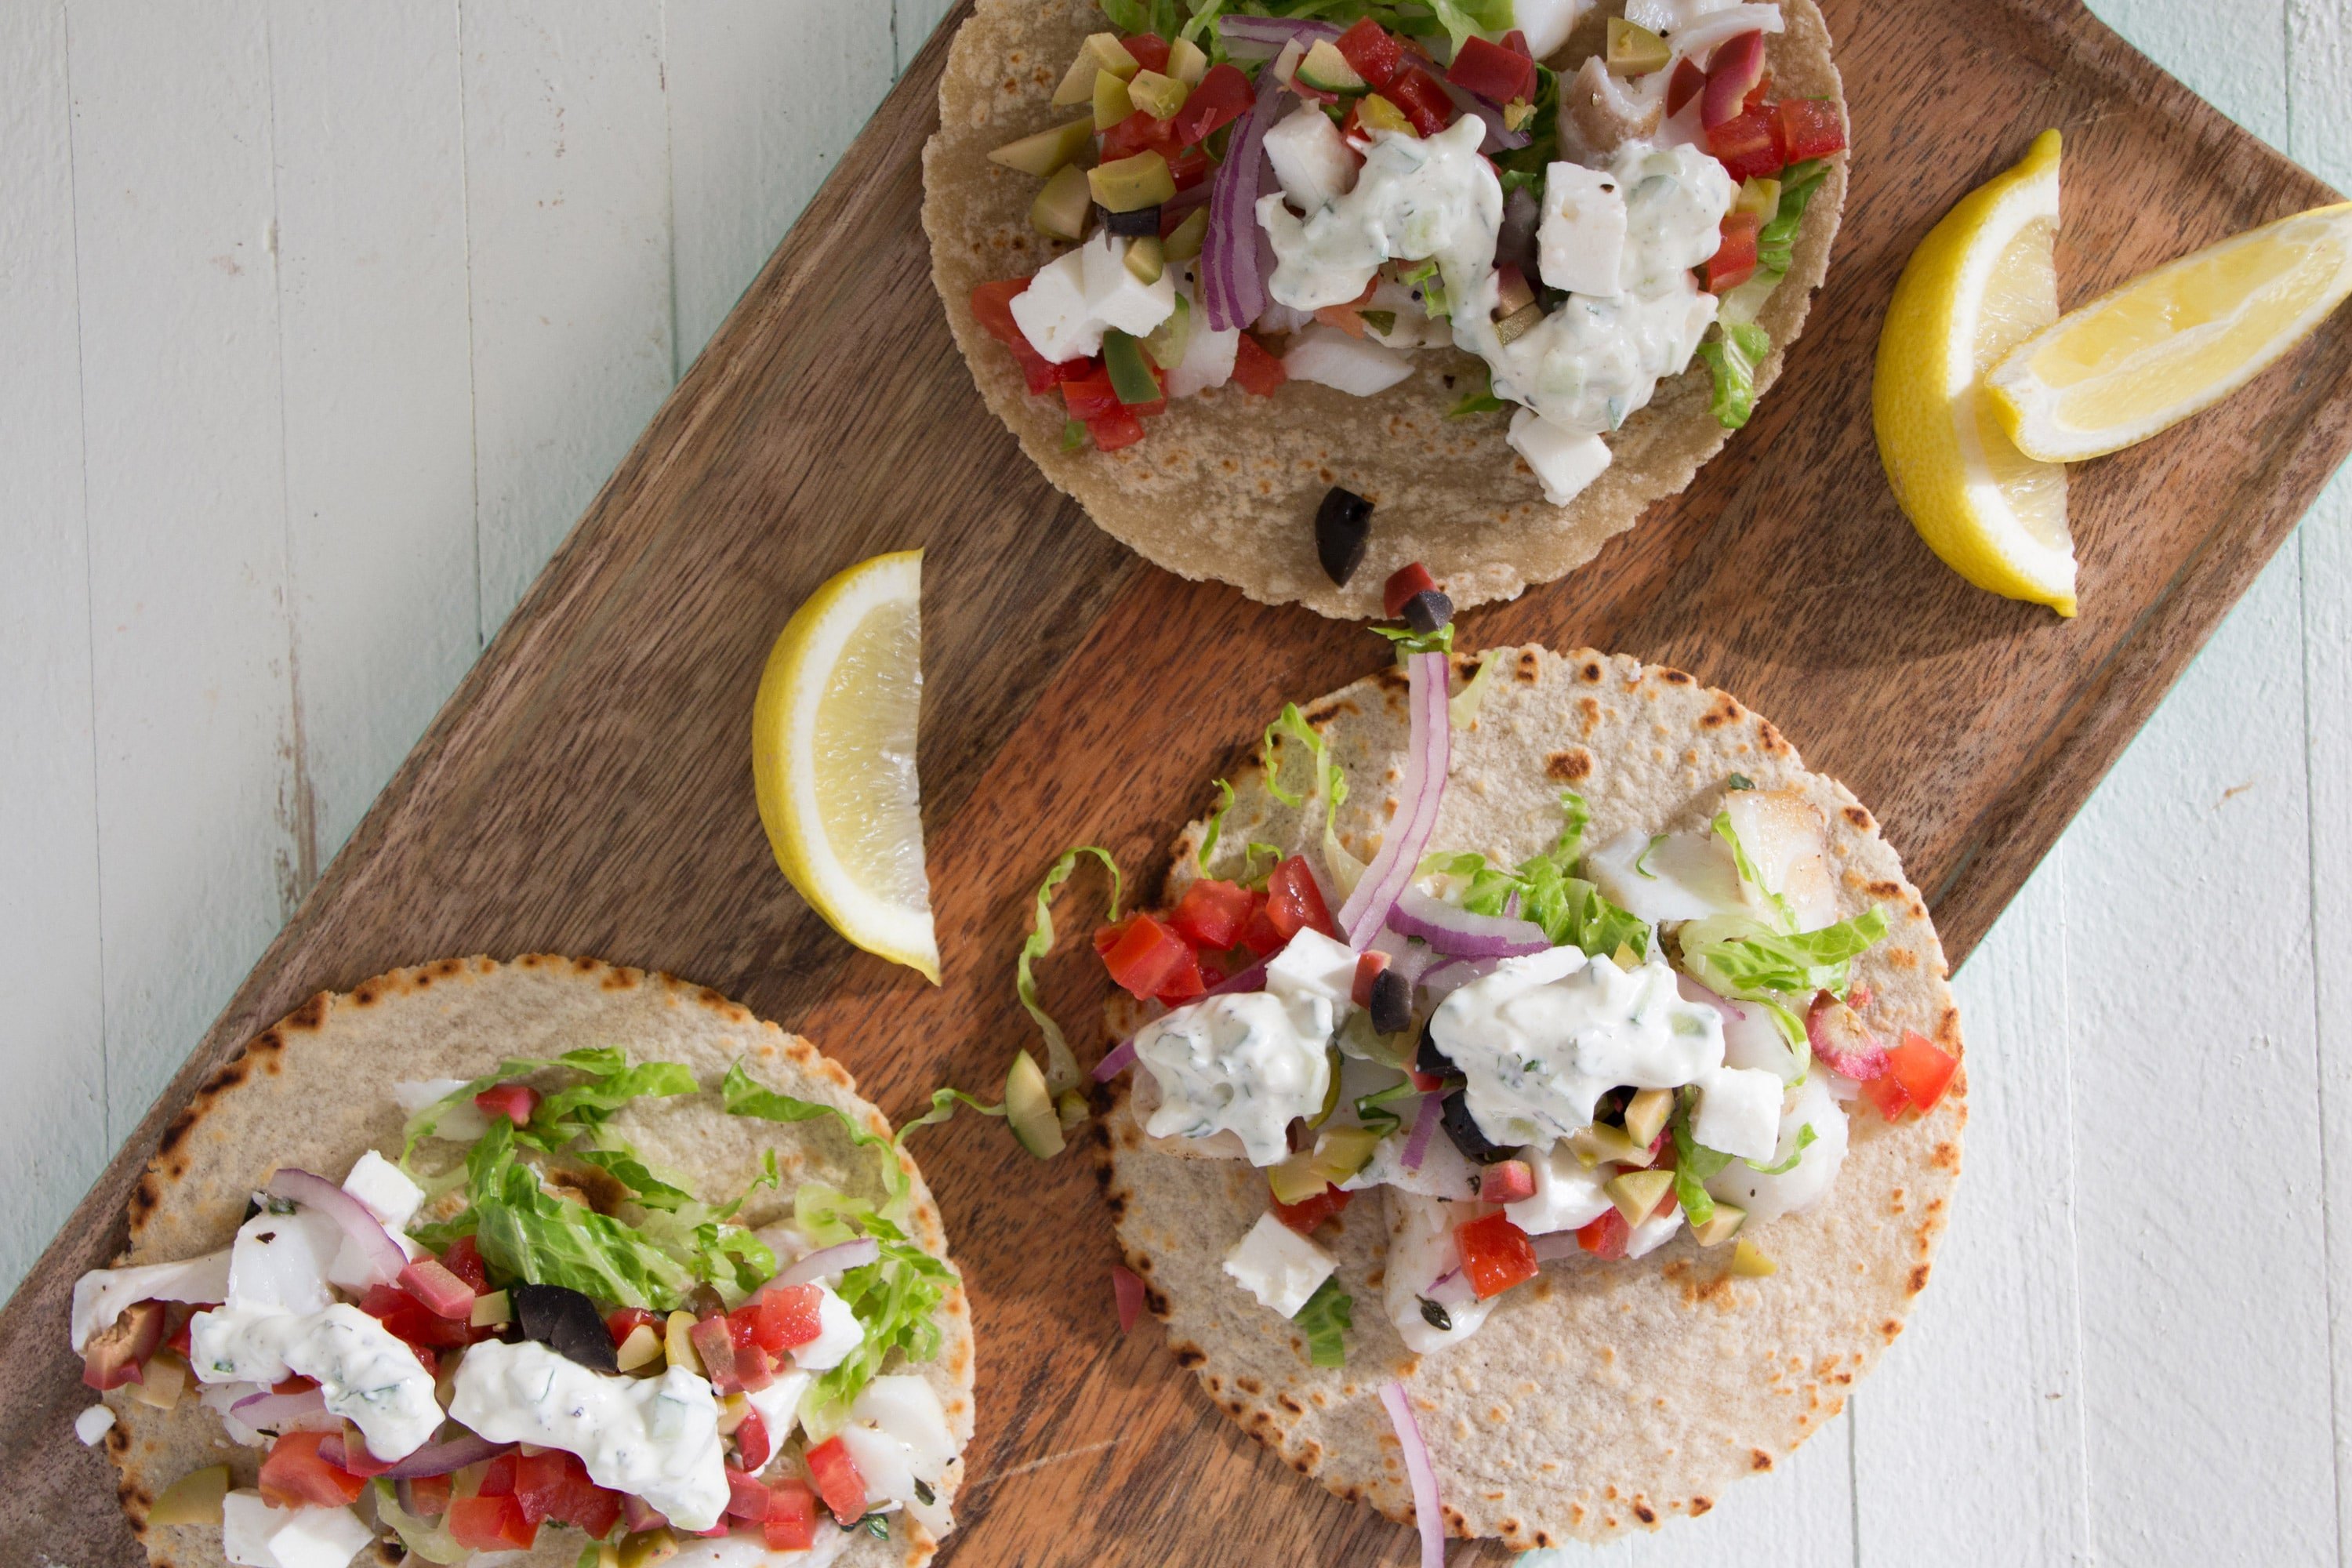 Greek Fish Tacos with perch, lettuce, olives, feta, and more.